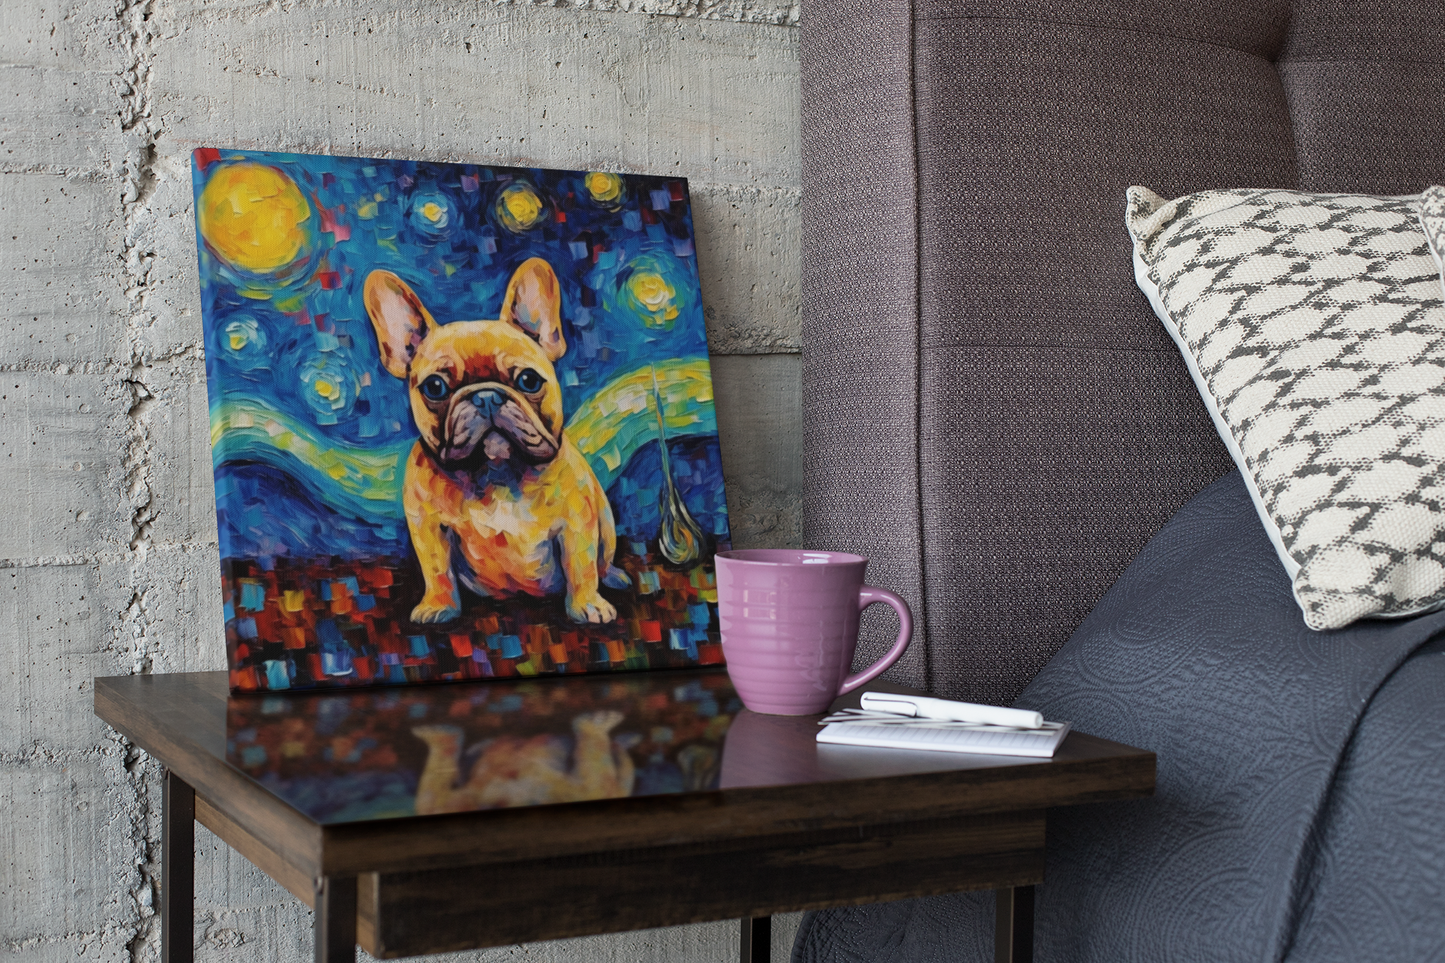 Frenchie Twilight Reverie - Canvas